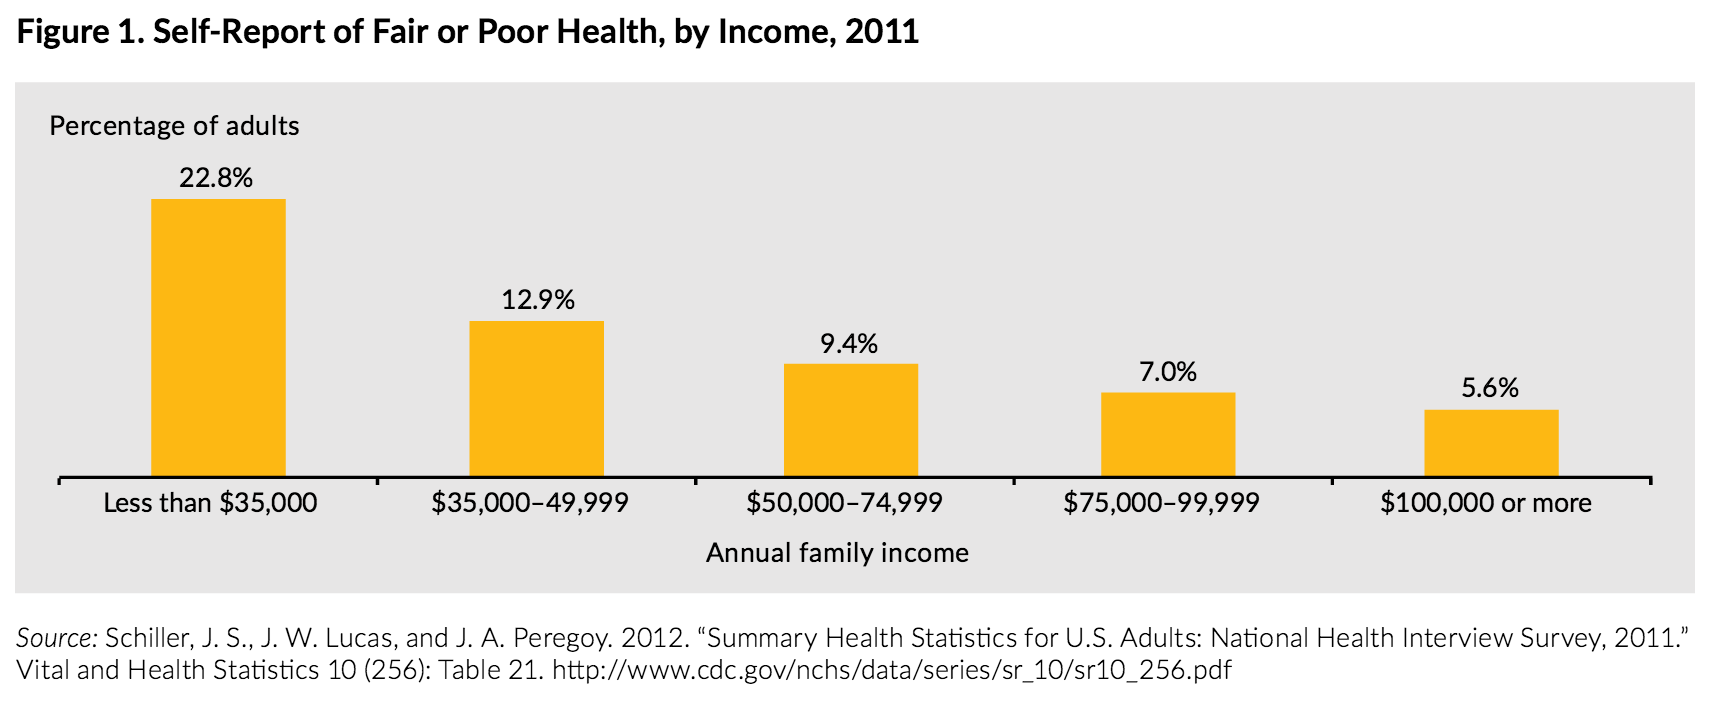 Source: http://www.urban.org/sites/default/files/alfresco/publication-pdfs/2000178-How-are-Income-and-Wealth-Linked-to-Health-and-Longevity.pdf